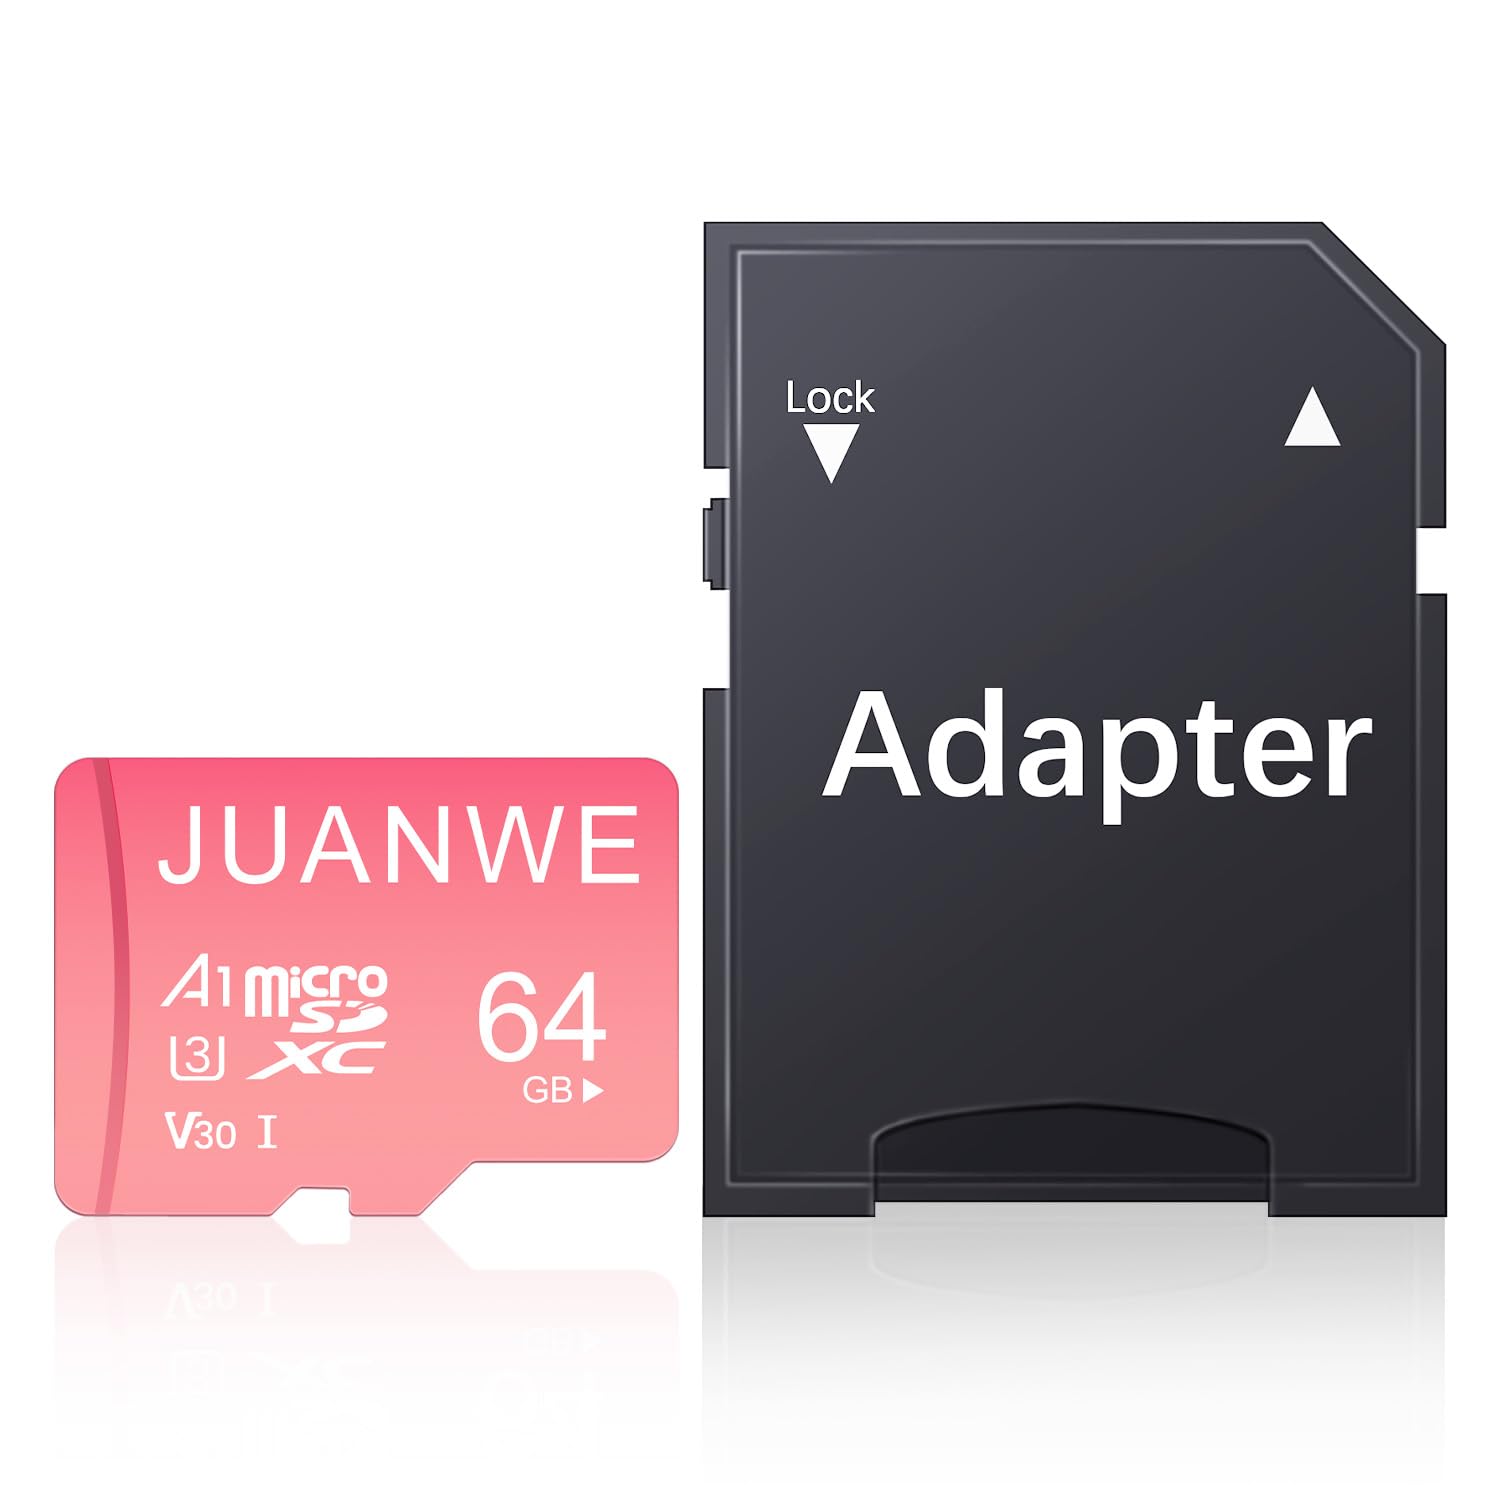 JUANWE 64GB Micro SD Card microSDXC 64GB Memory Card, Nintendo-Switch Compatible Memory Card, UHS-I C10 U3 V30 4K UHD Video A1 TF Card with Adapter (Pink)